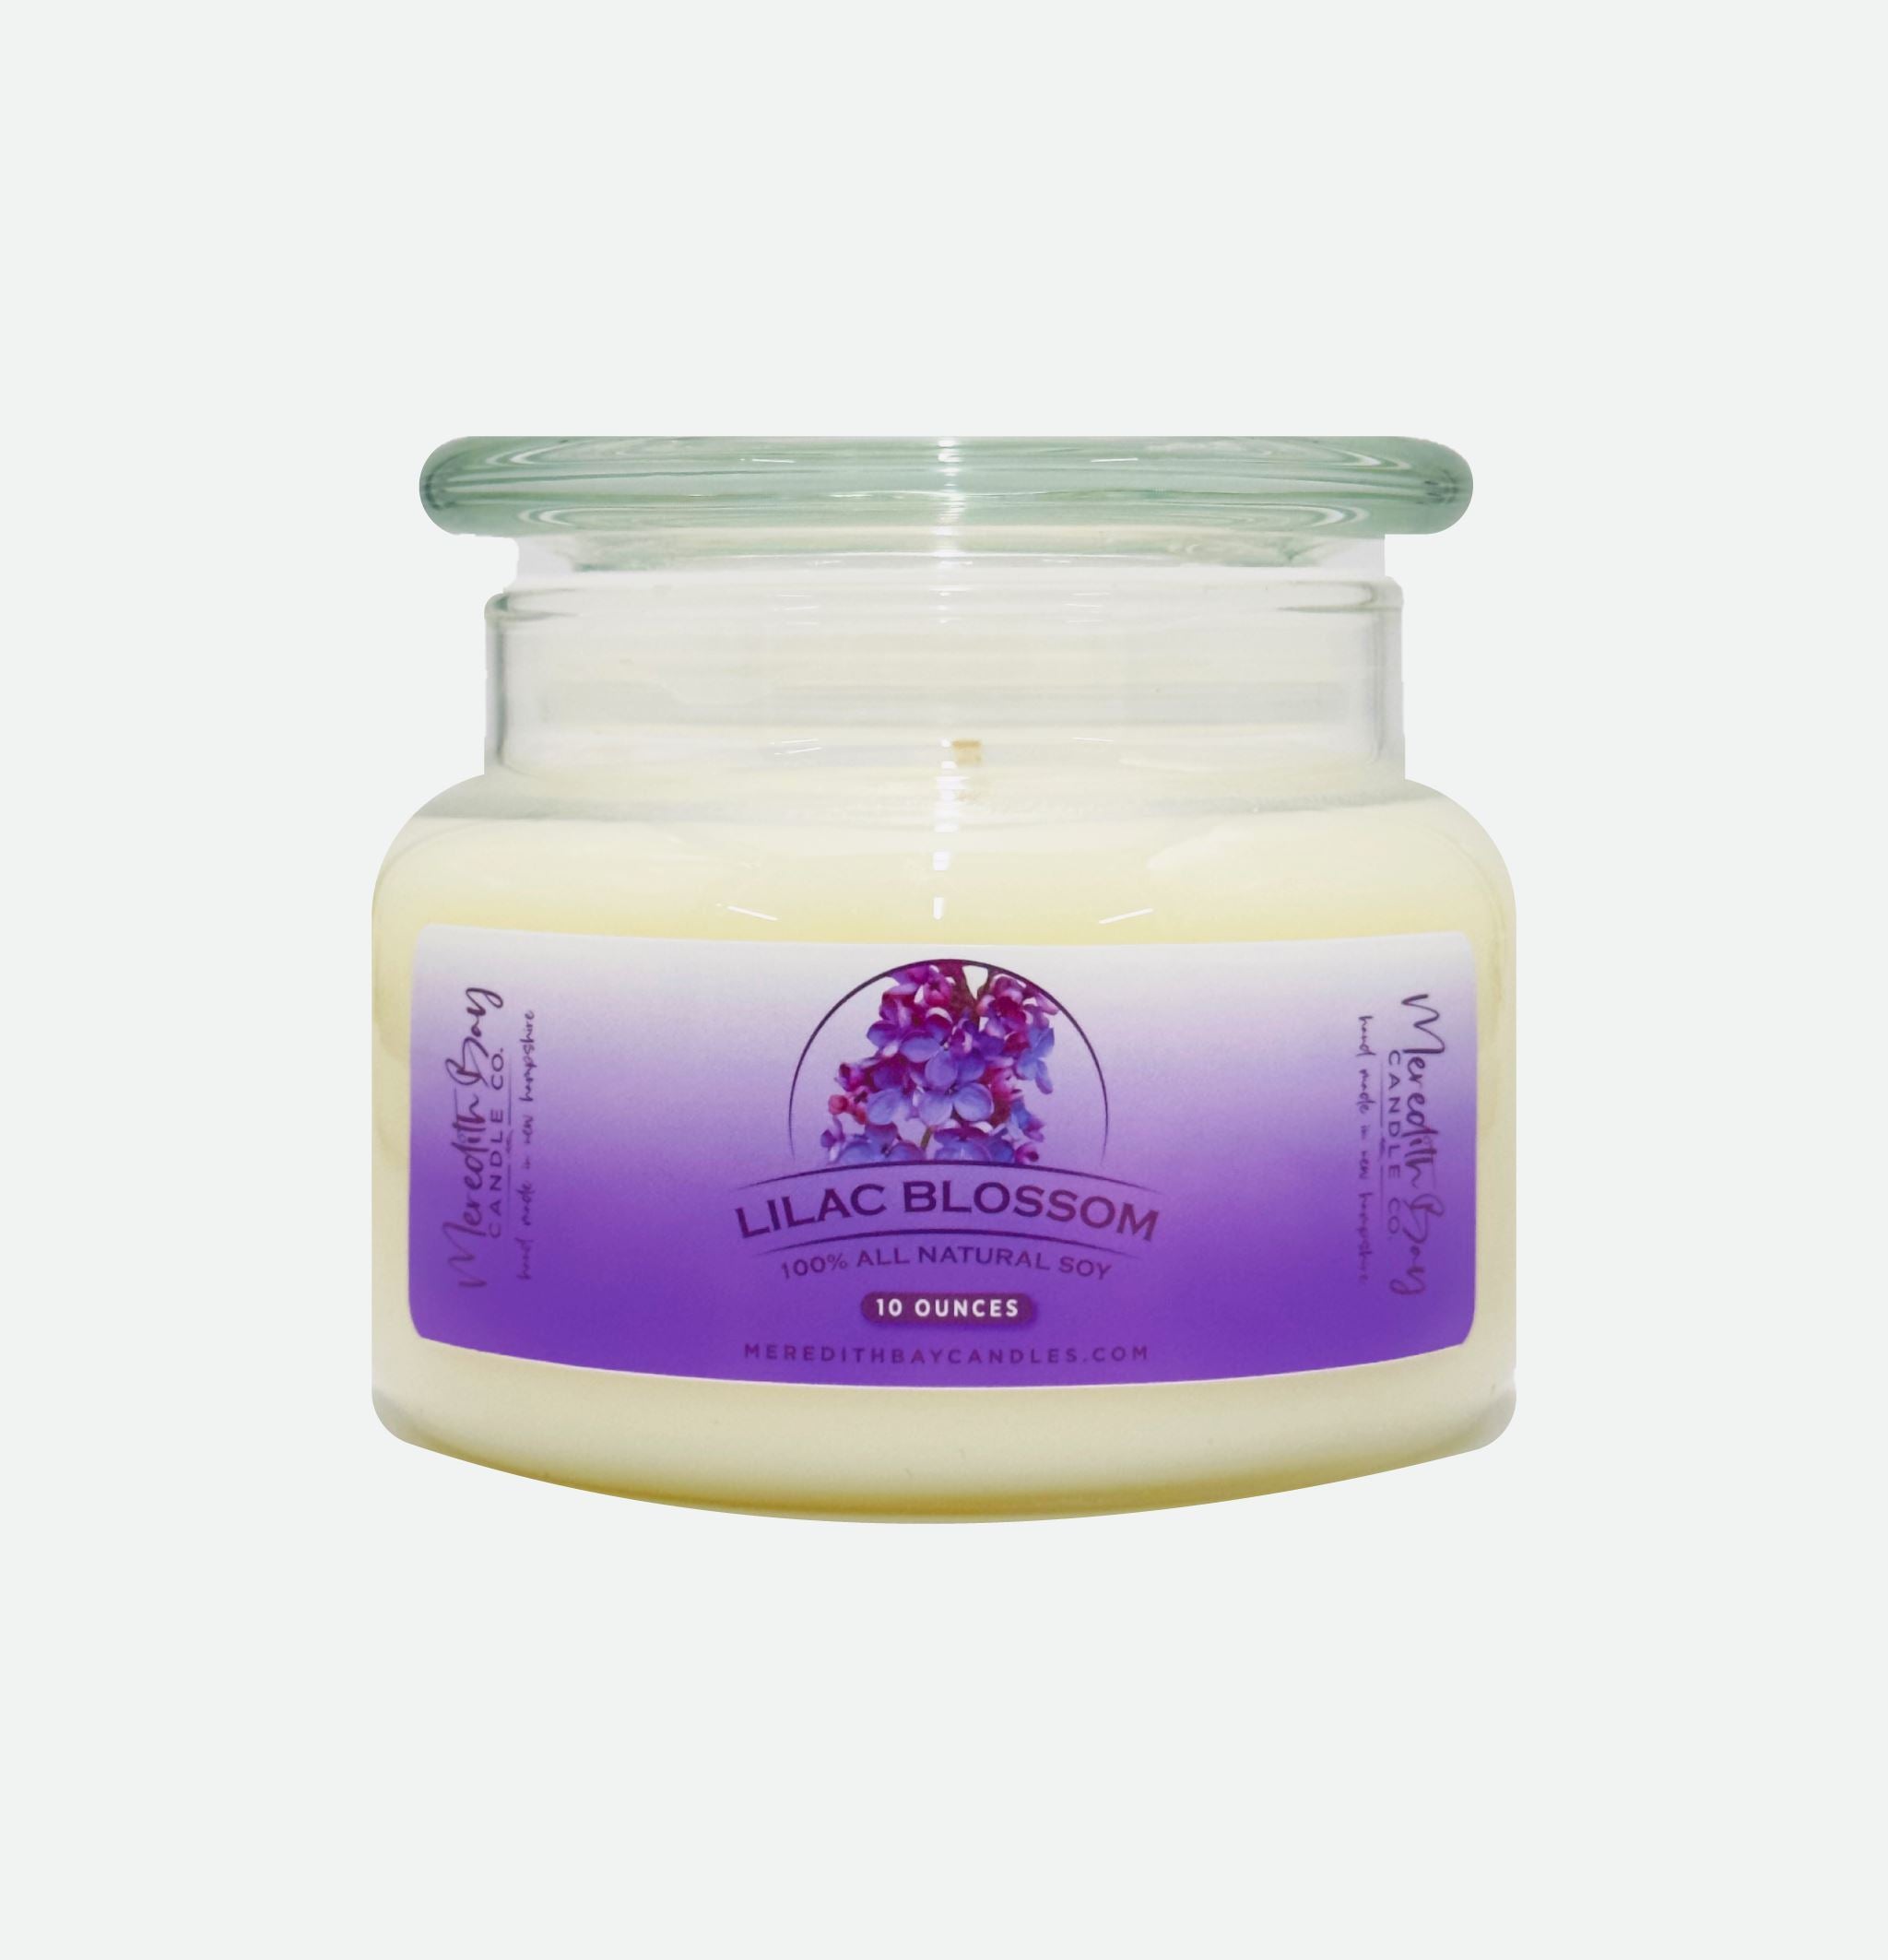 Lilac Blossom Soy Candle Meredith Bay Candle Co 10 Oz 